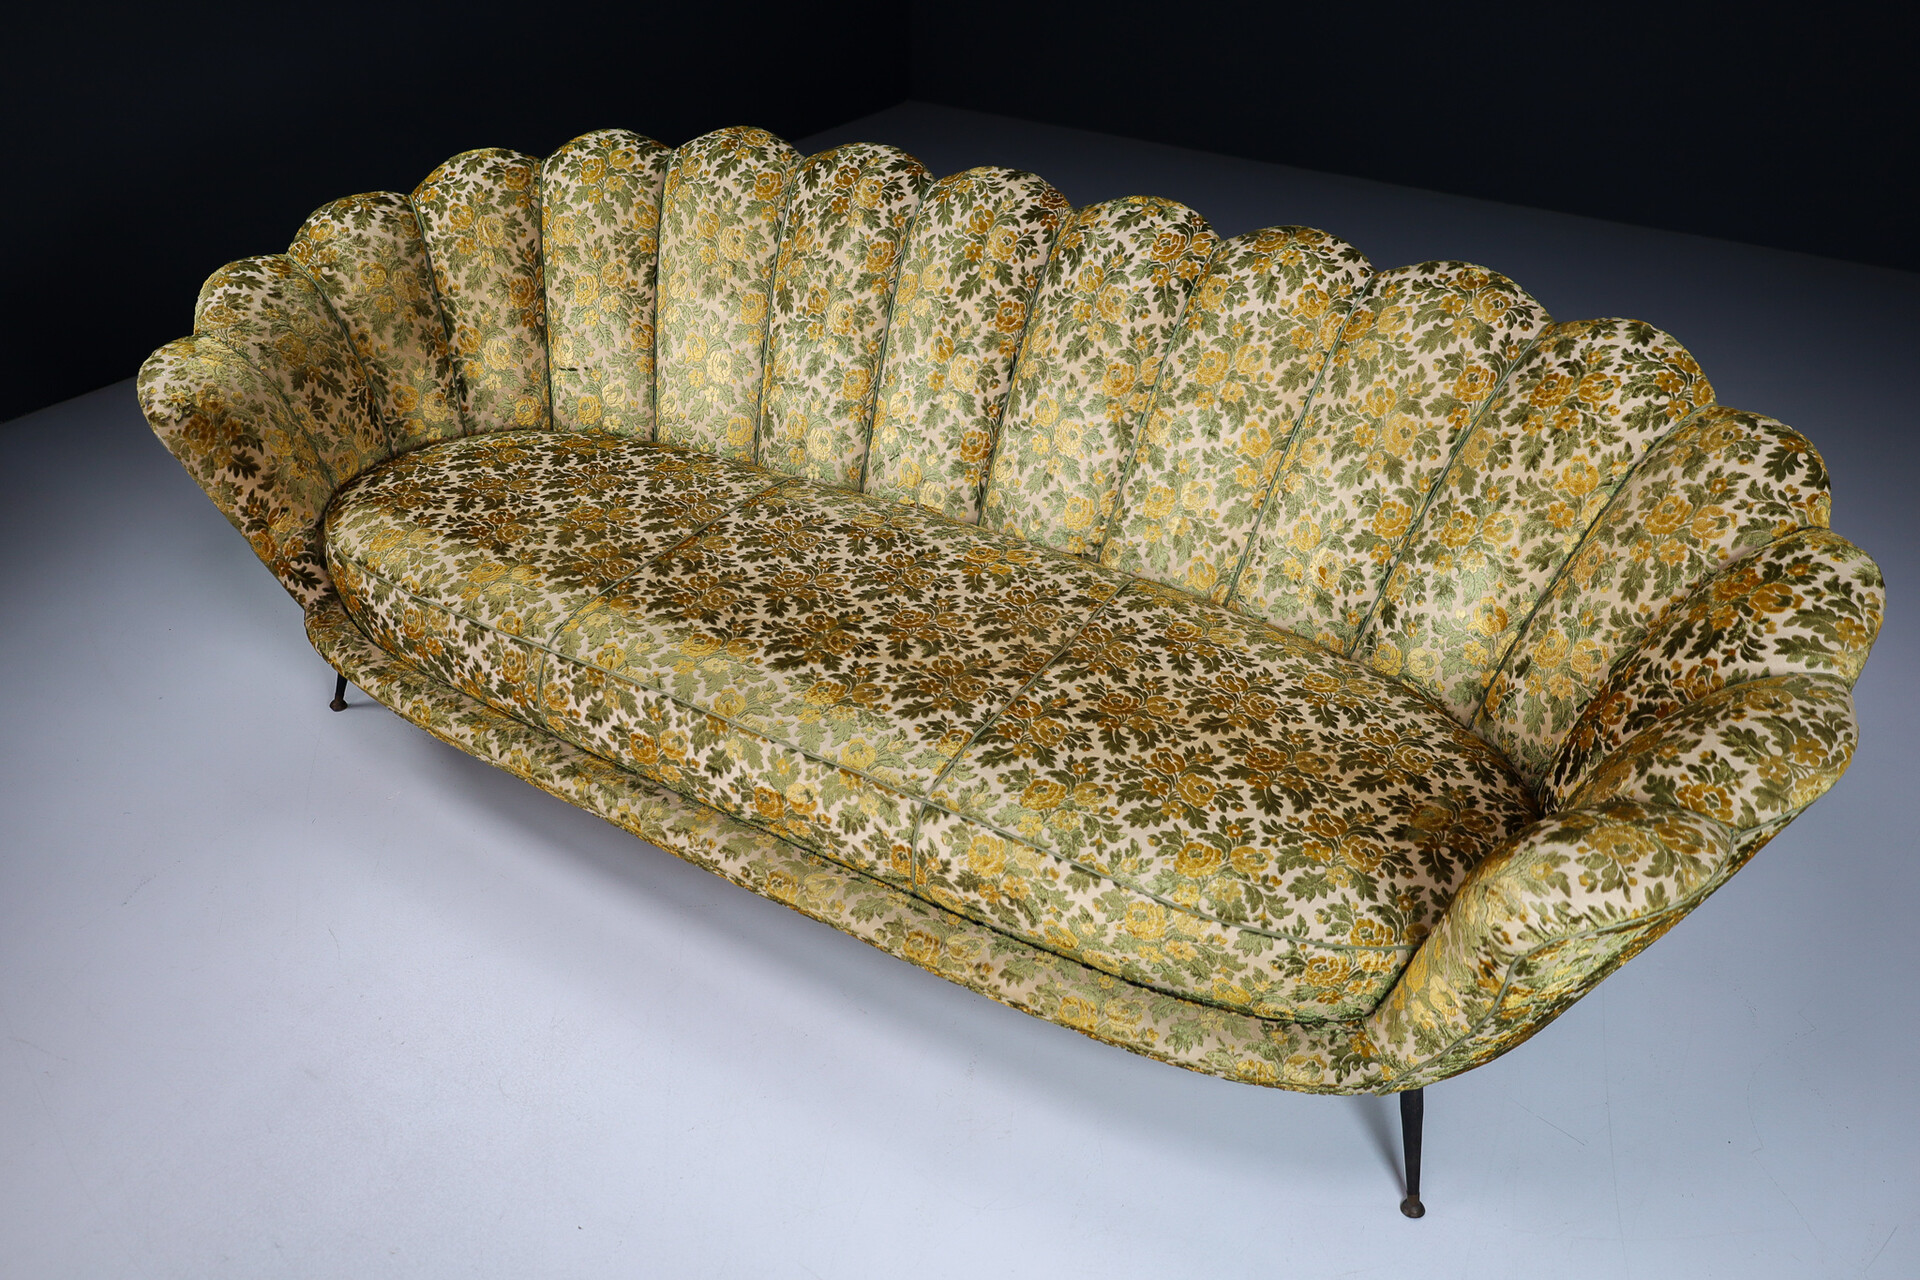 Mid century modern Elegant Fan Curved Lounge sofa In Original Floral Upholstery, Italy 1950s Mid-20th century